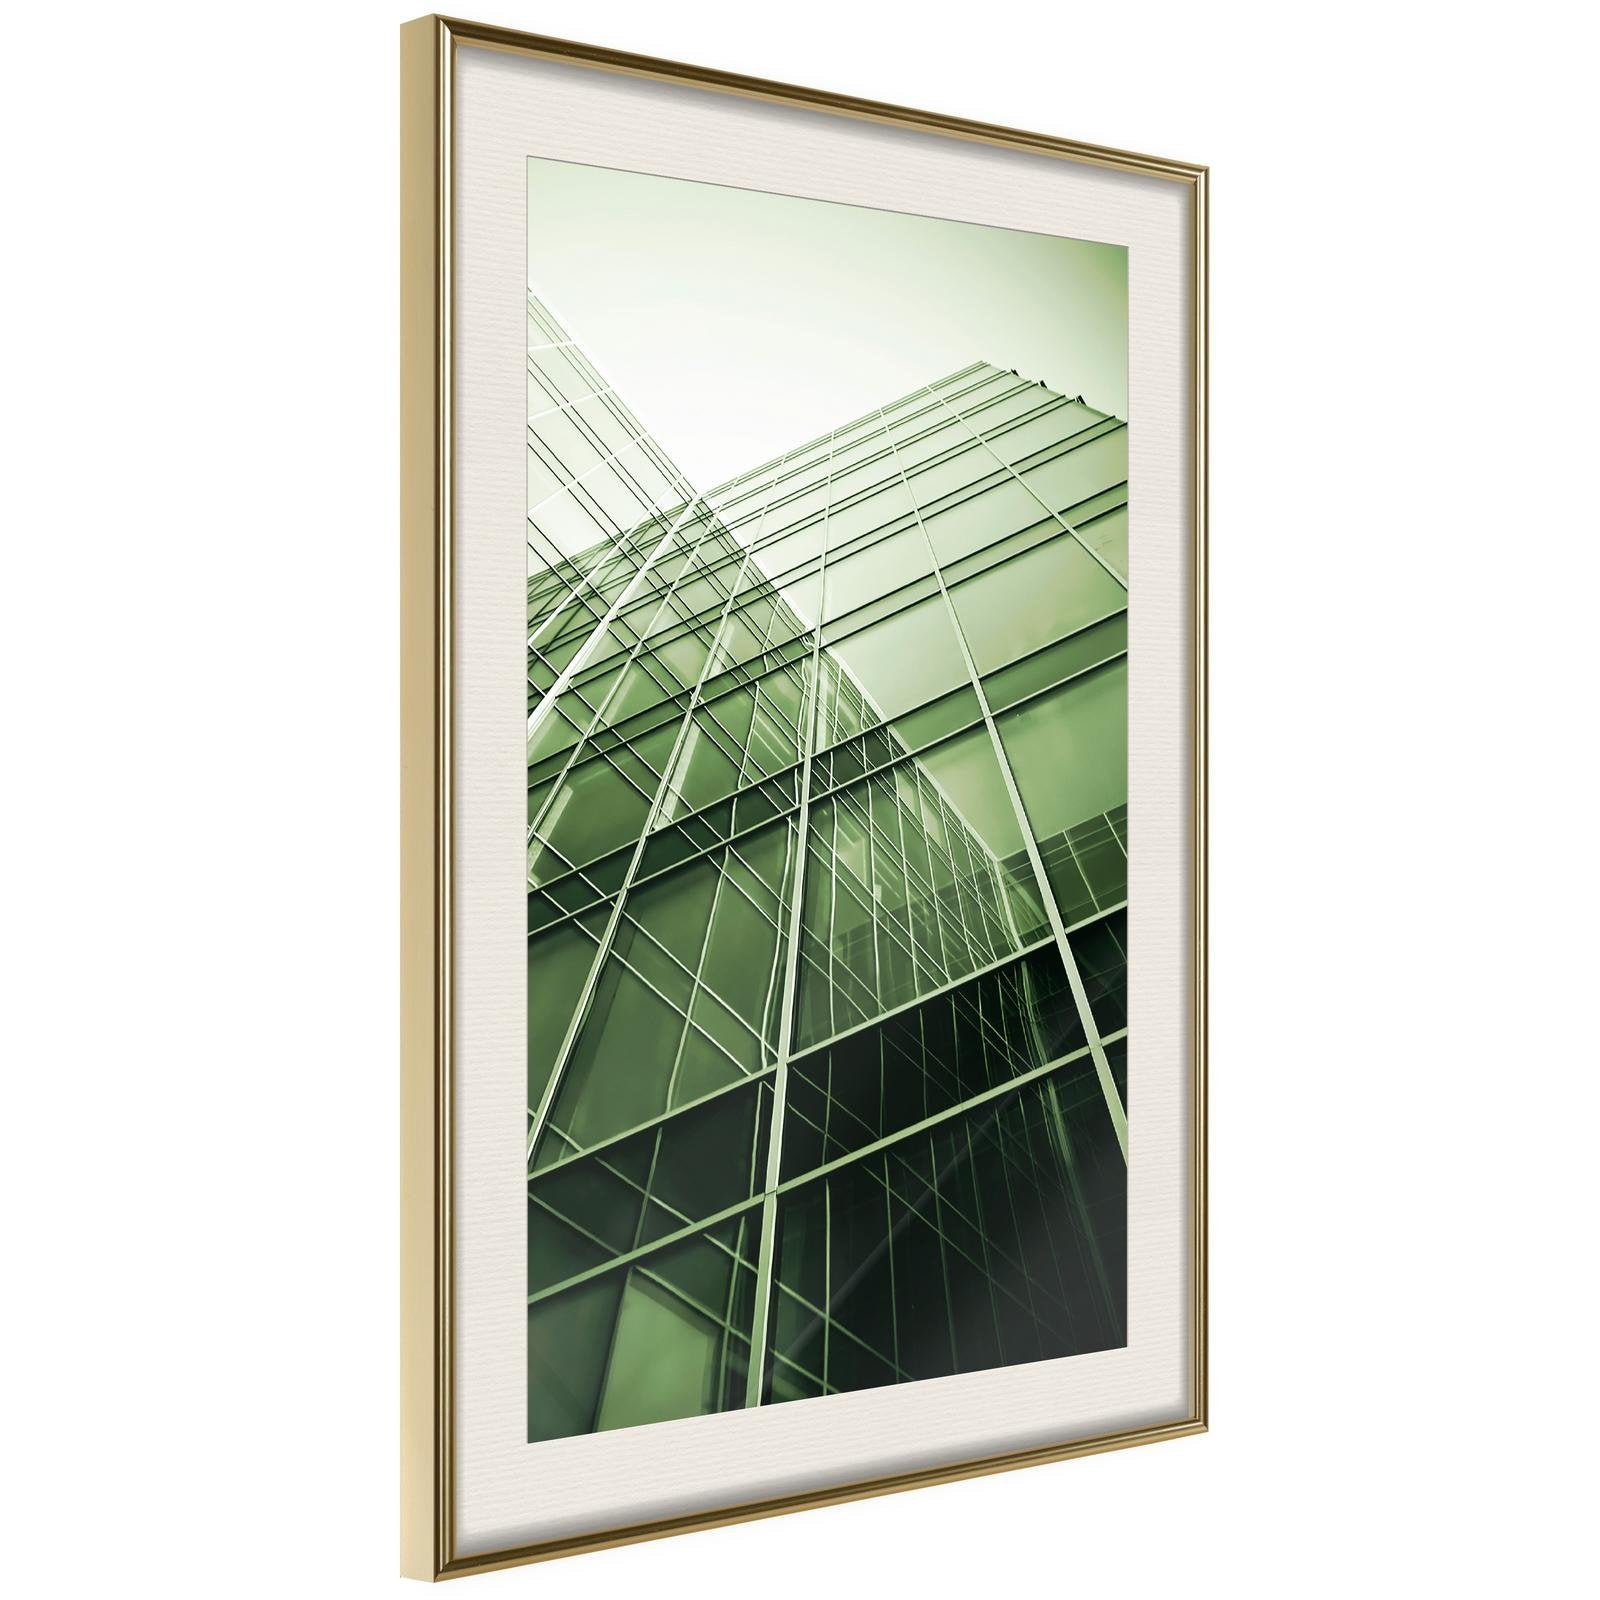 Inramad Poster / Tavla - Steel and Glass (Green)-Poster Inramad-Artgeist-20x30-Guldram med passepartout-peaceofhome.se